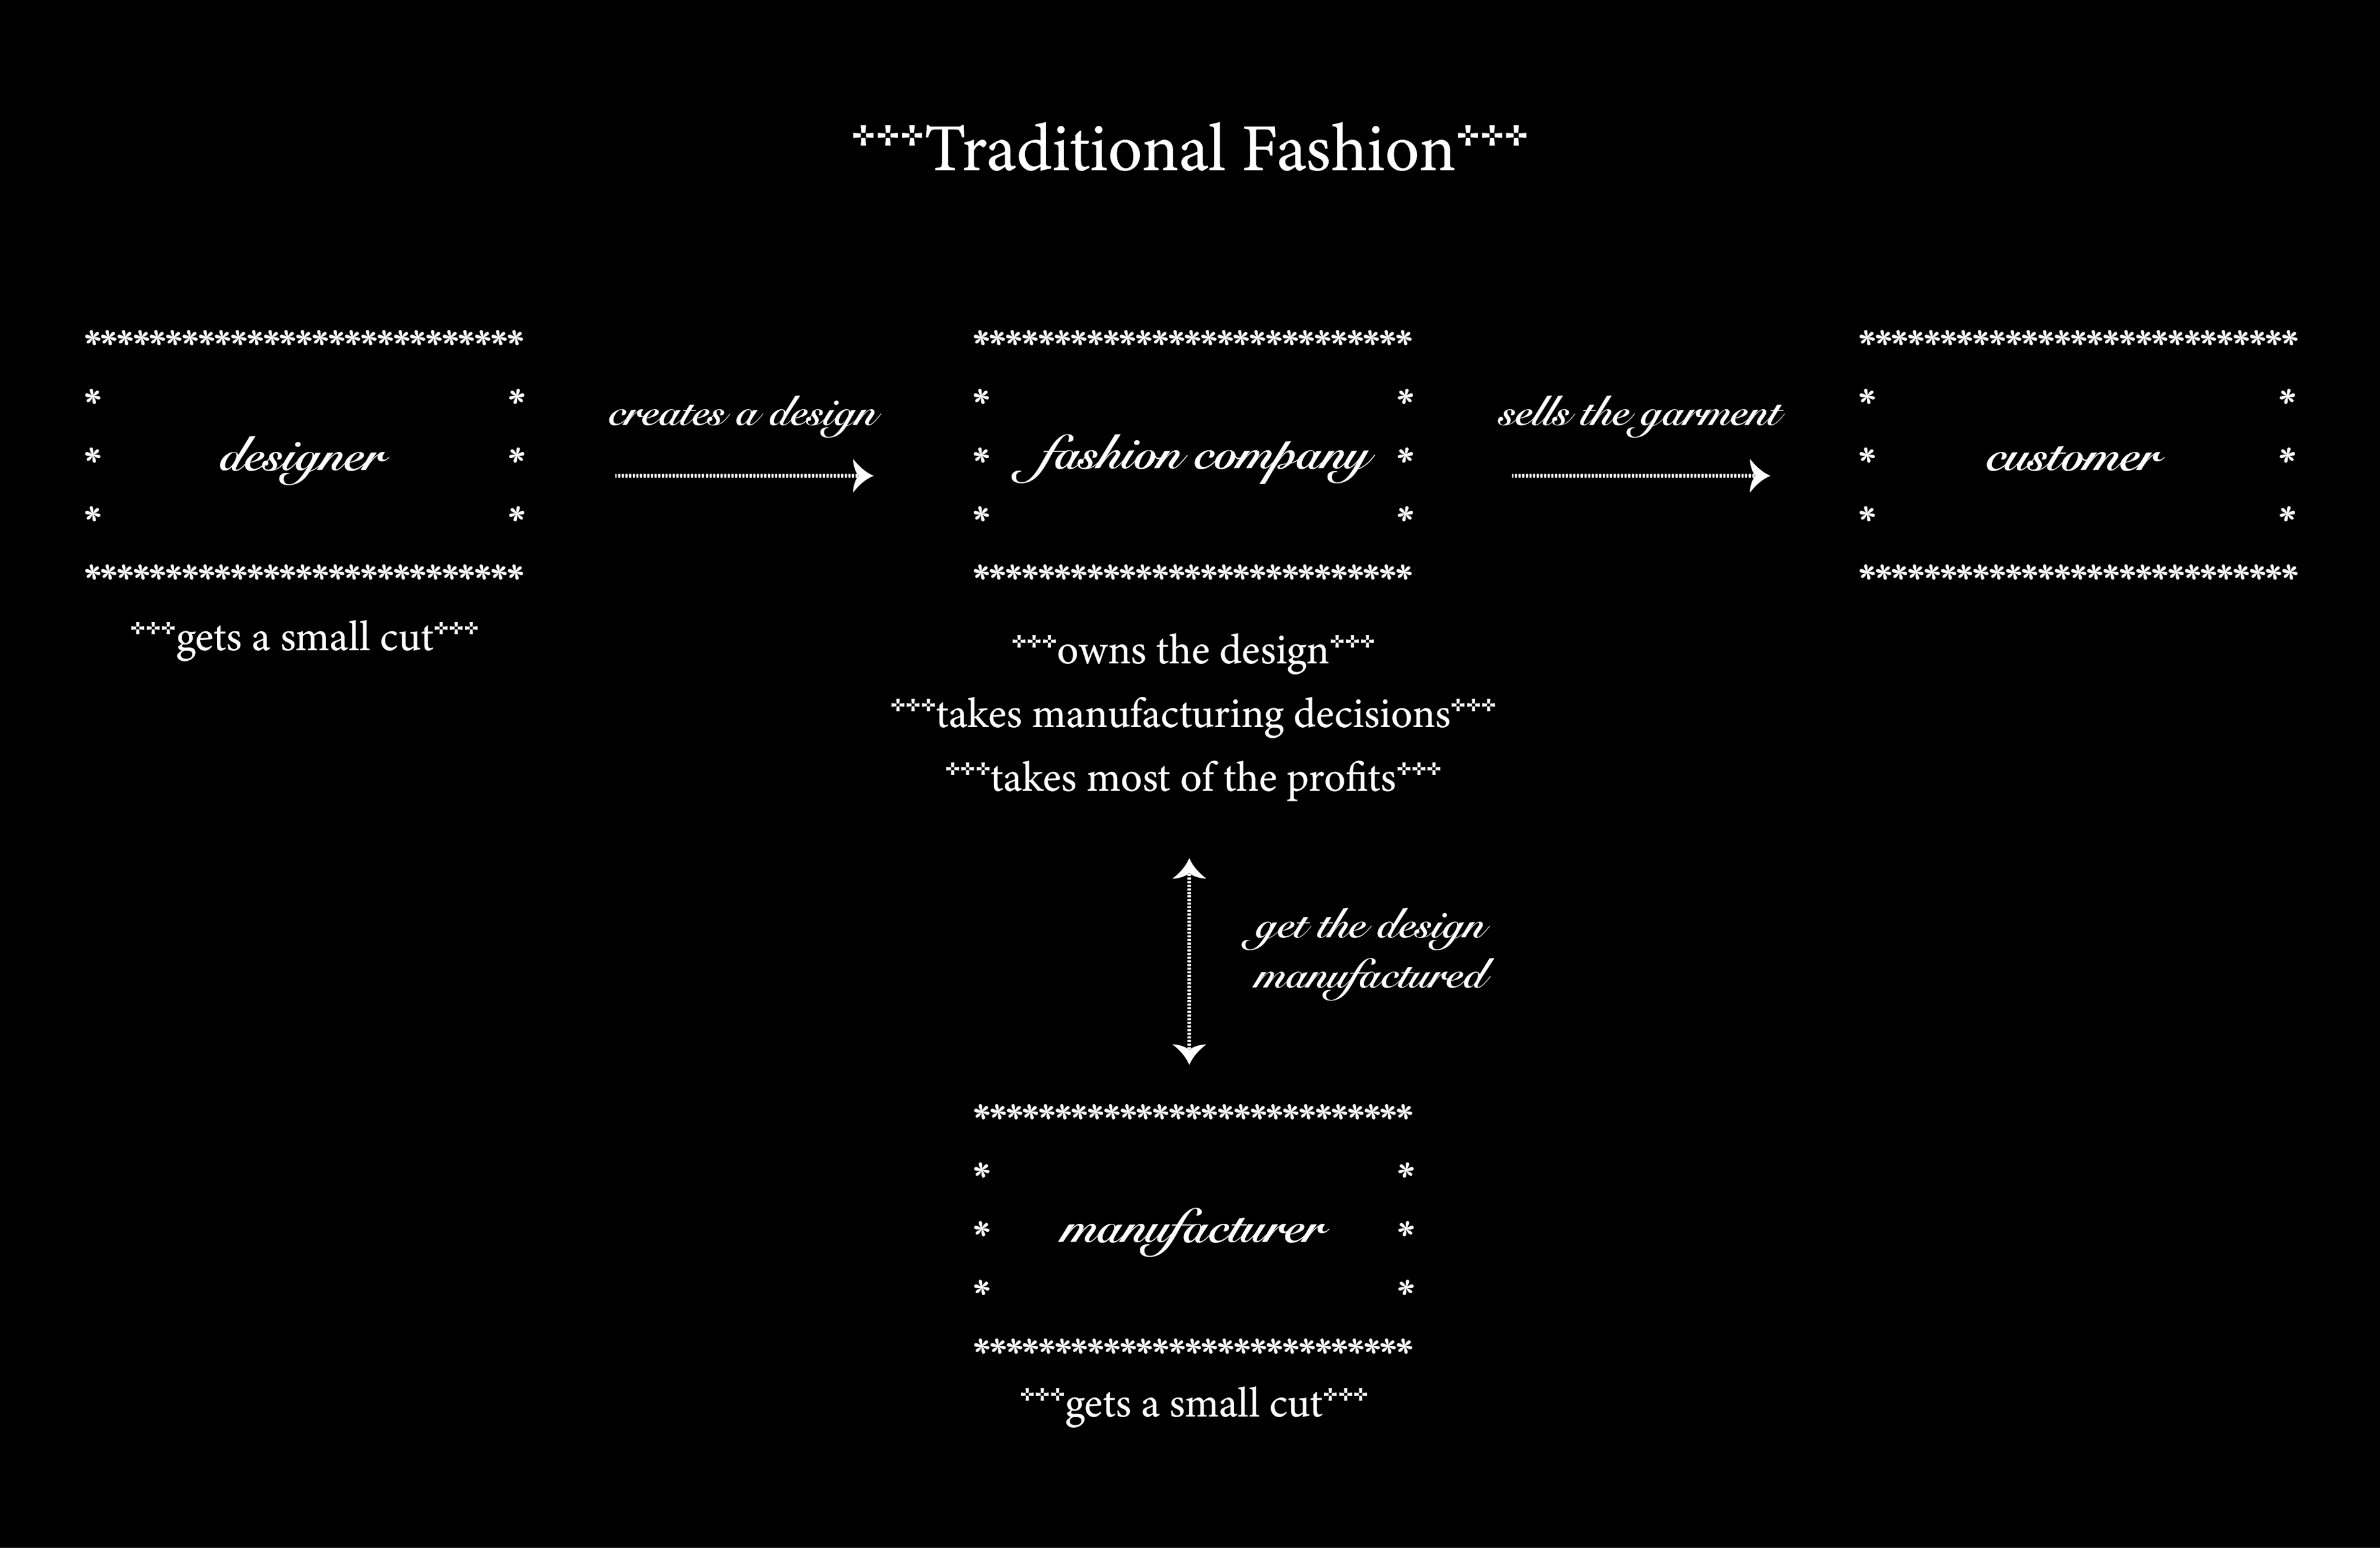 the approach of the traditional fashion industry